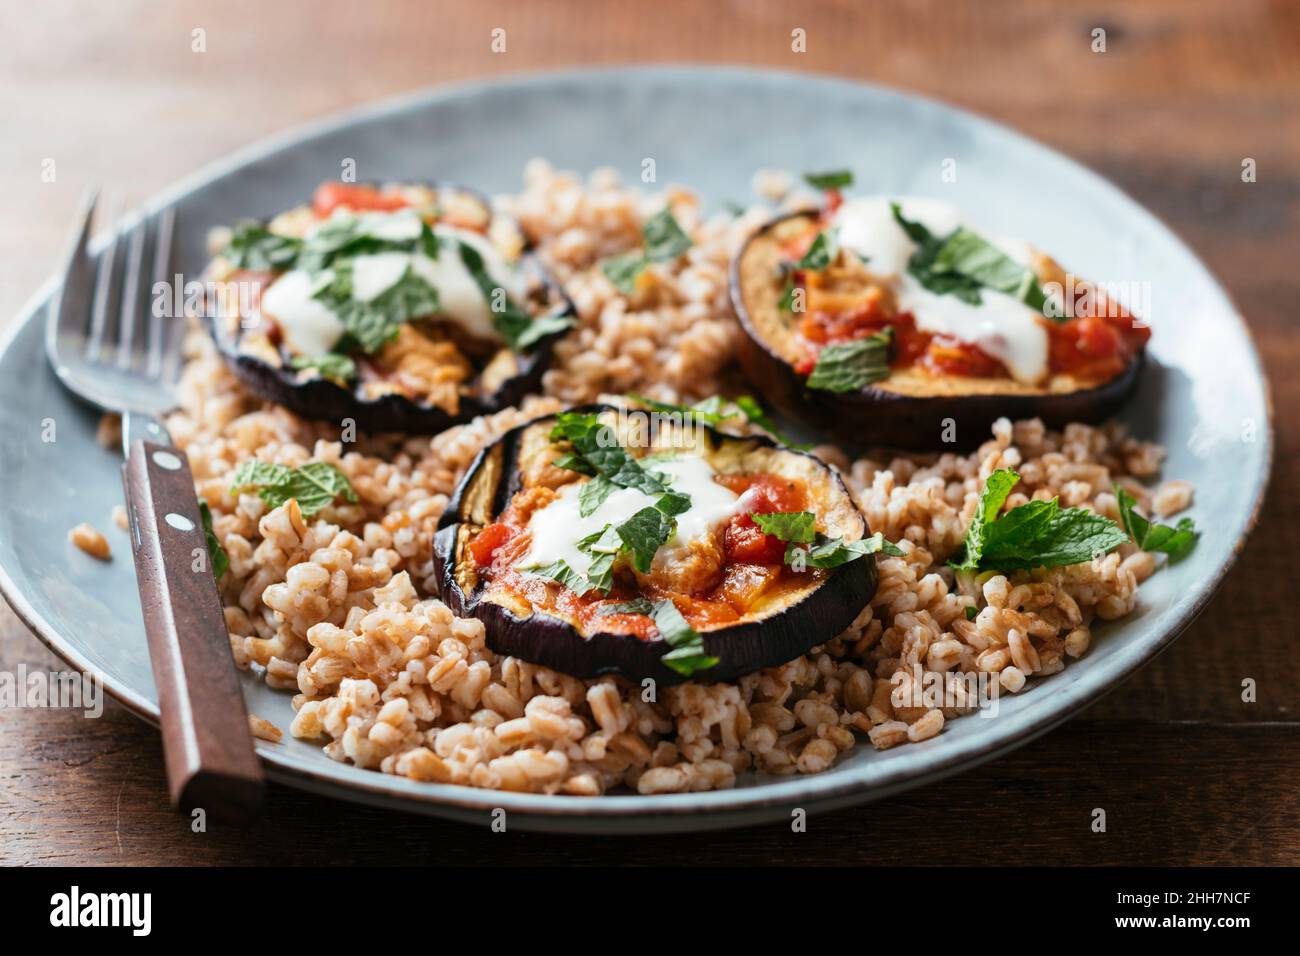 Grilled Eggplant on Farro with Tomato Sauce, Soy Yogurt and Mint Stock Photo